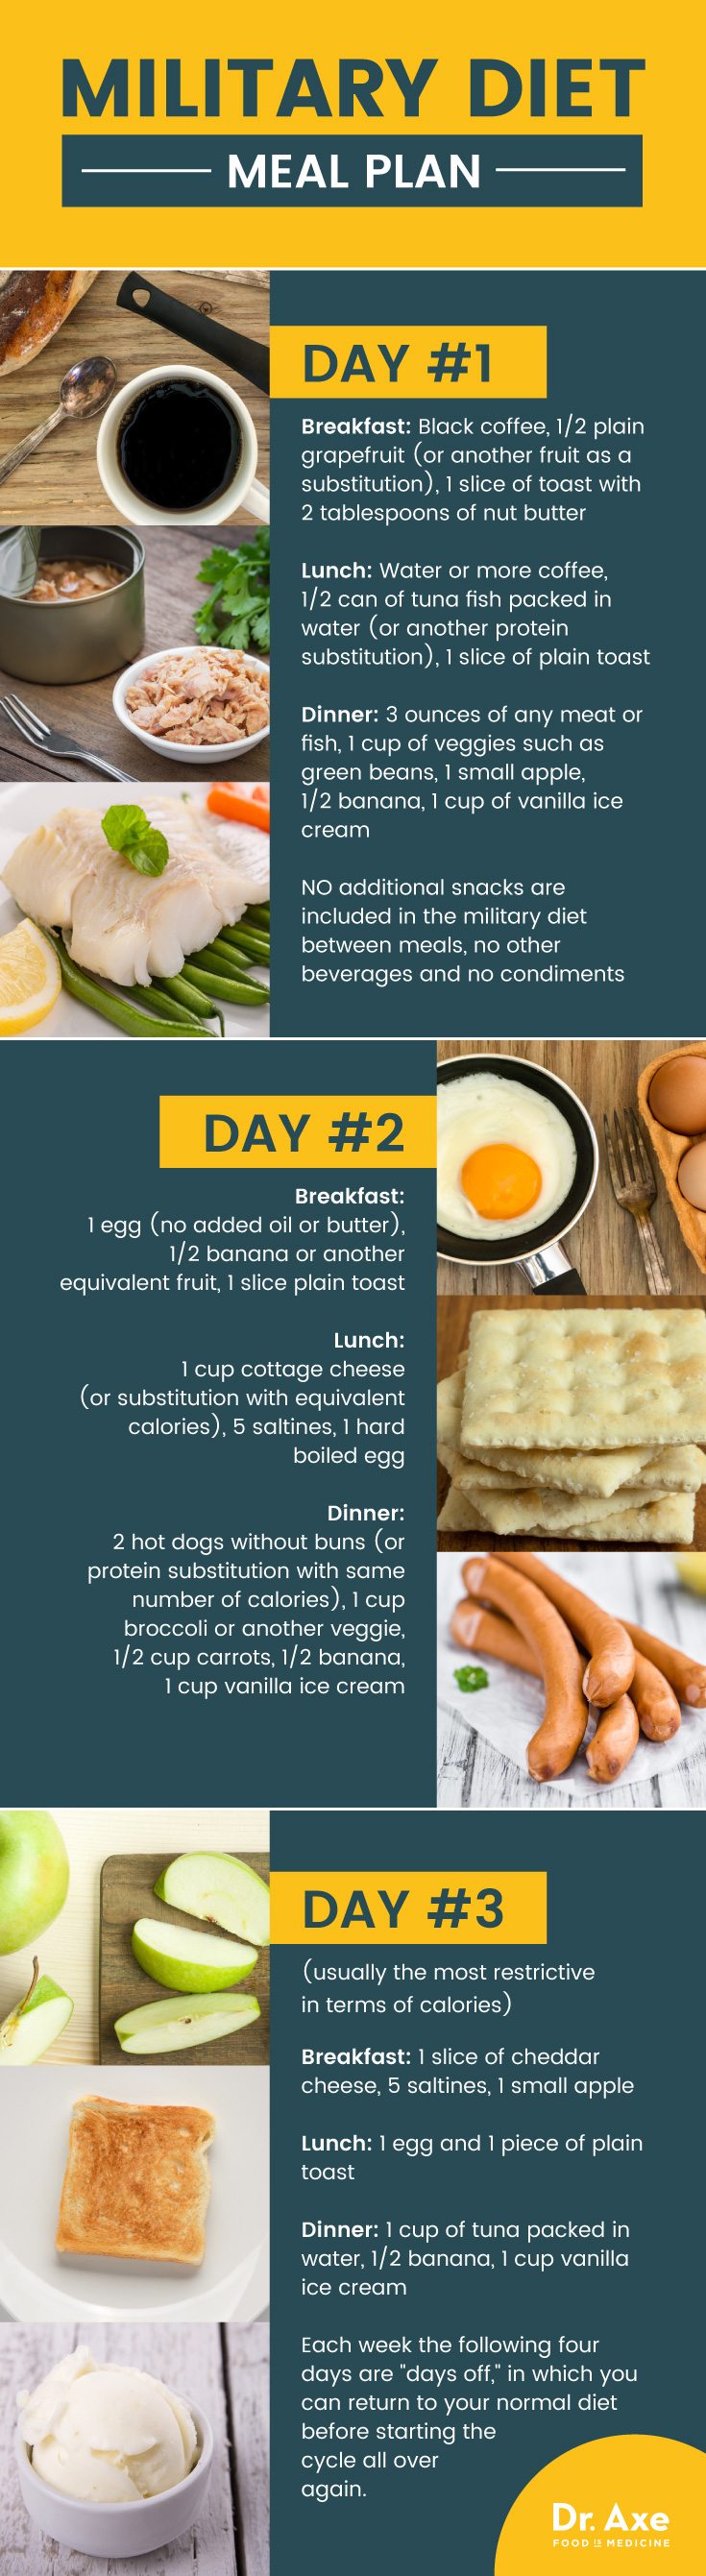 Military Diet Plan: Is the 3-Day Military Diet Best for ...